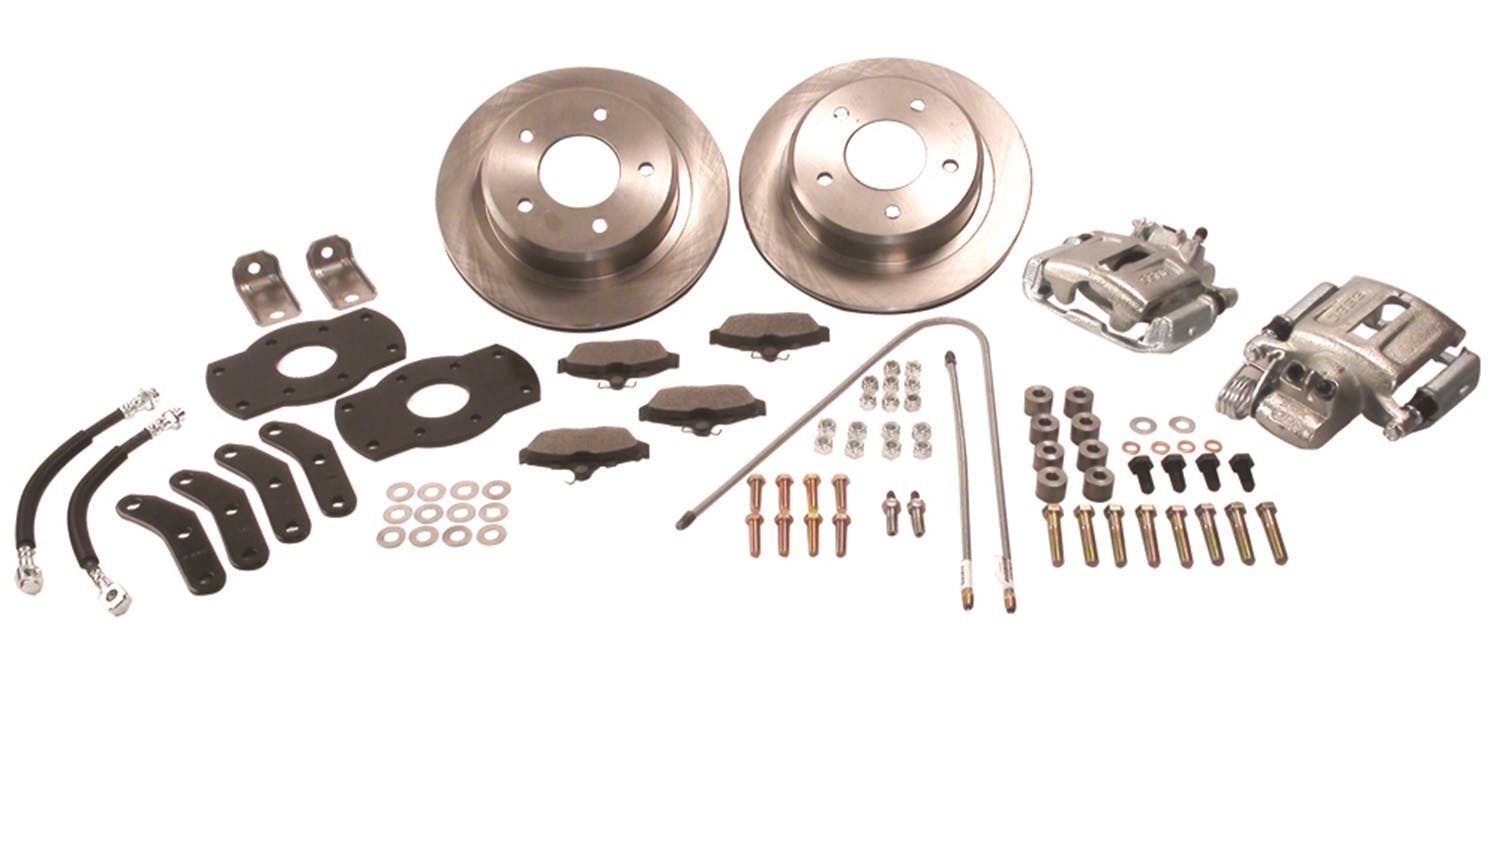 Stainless Steel Brakes A157BK Kit A157 w/black calipers